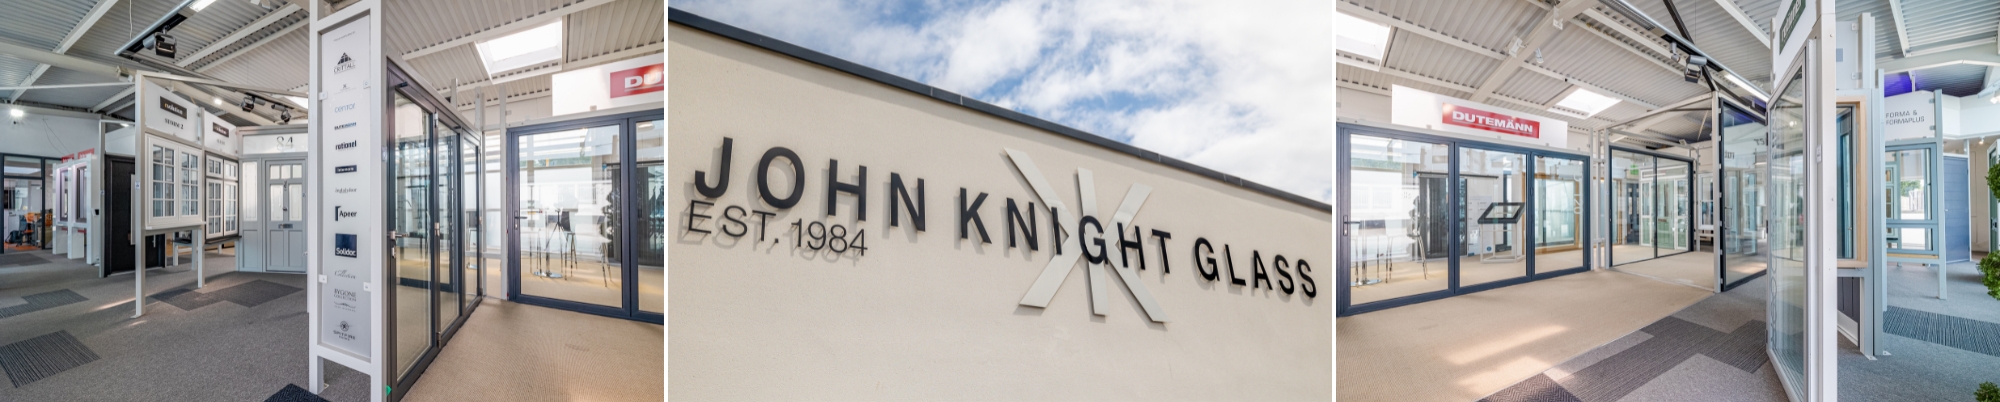 Showroom Banner with John Knight Glass Logo Outside